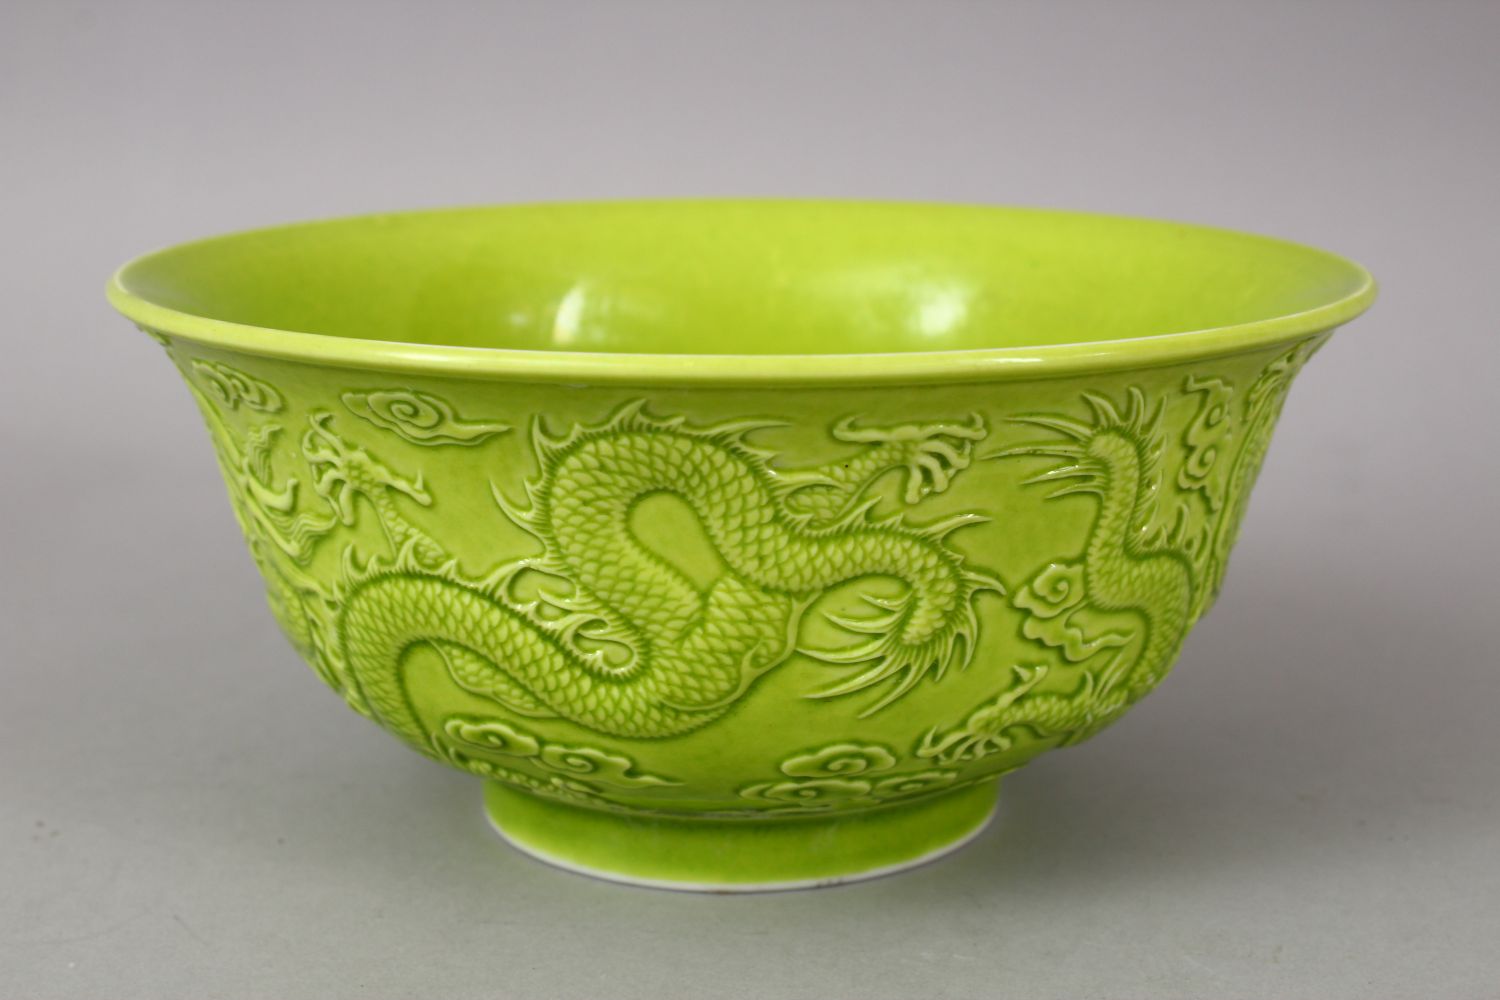 A CHINESE GREEN GLAZED PORCELAIN DRAGON BOWL, with moulded decoration of dragons amongst stylized - Image 2 of 6